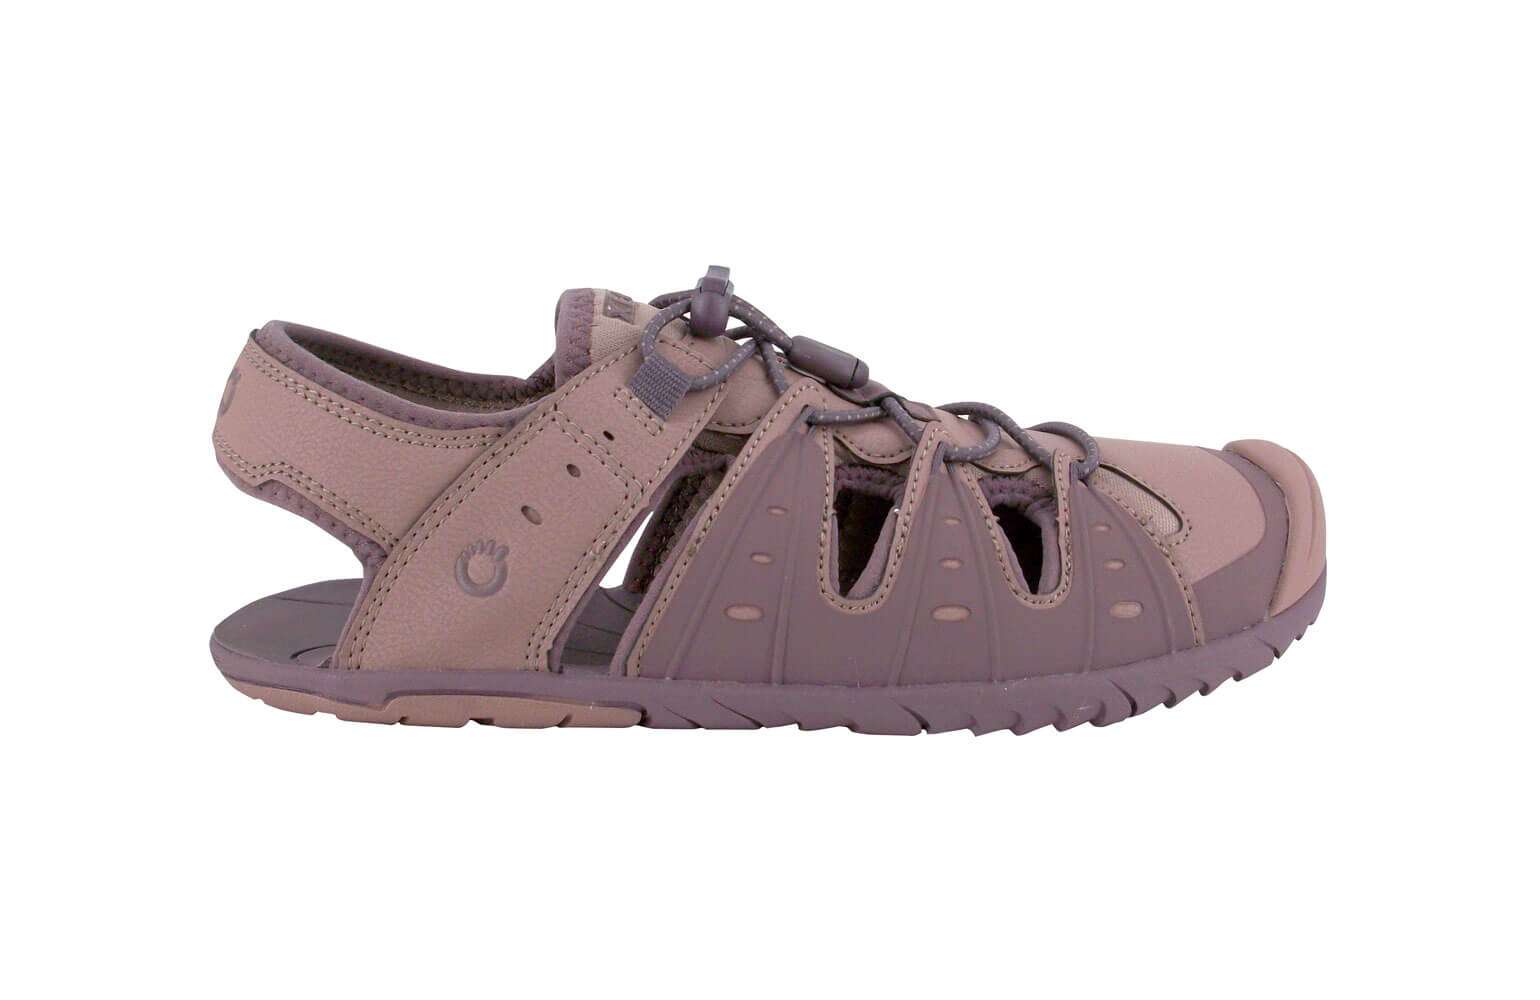 Xero Shoes Colorado Women Minimalist Shoes For On Road And Light Trail